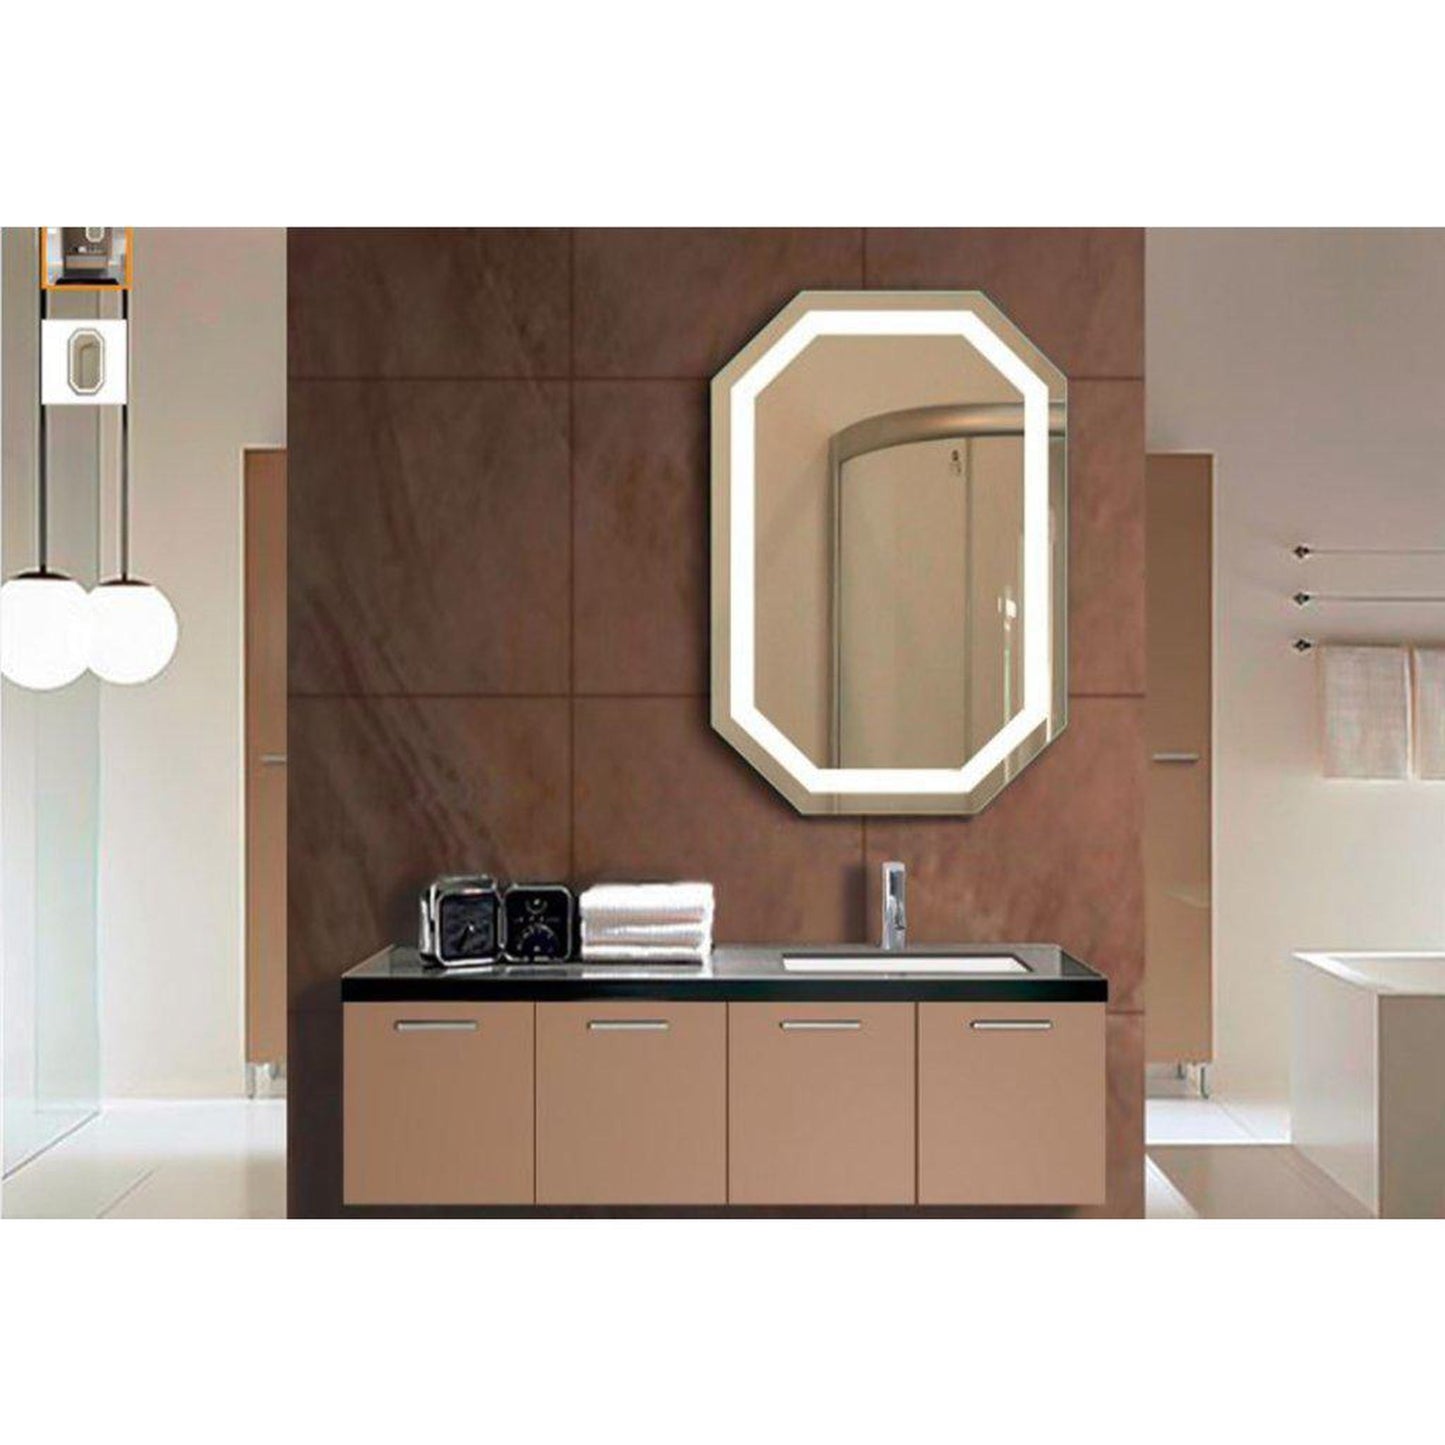 Krugg Reflections Tudor 30" x 20" 5000K Octagon Wall-Mounted Illuminated Silver Backed LED Mirror With Built-in Defogger and Touch Sensor On/Off Built-in Dimmer